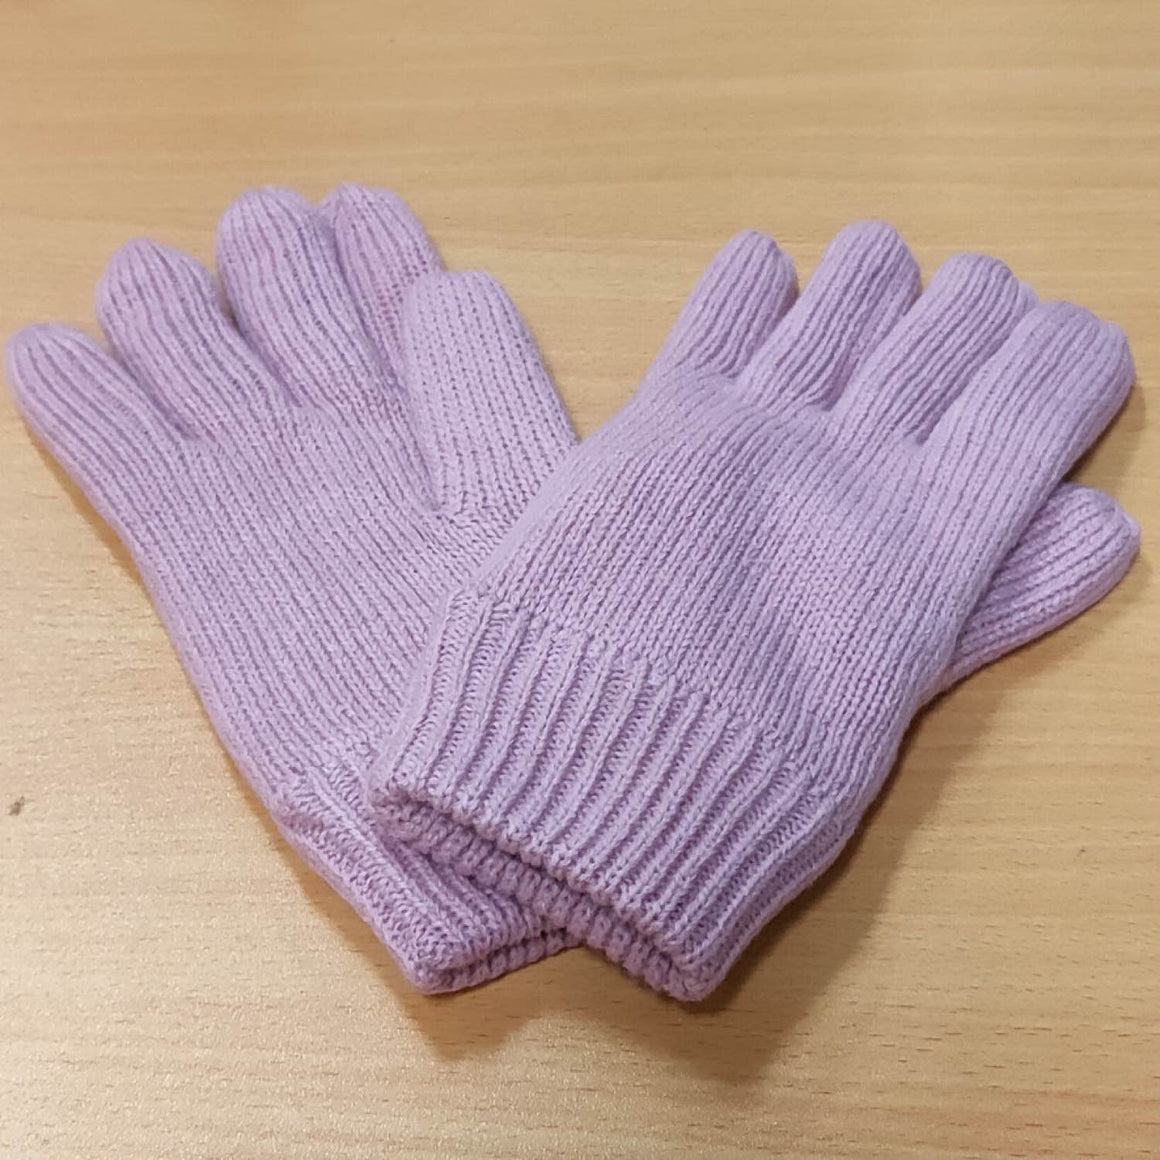 Avenel Acrylic Glove with Thinsulate Lining - Pink